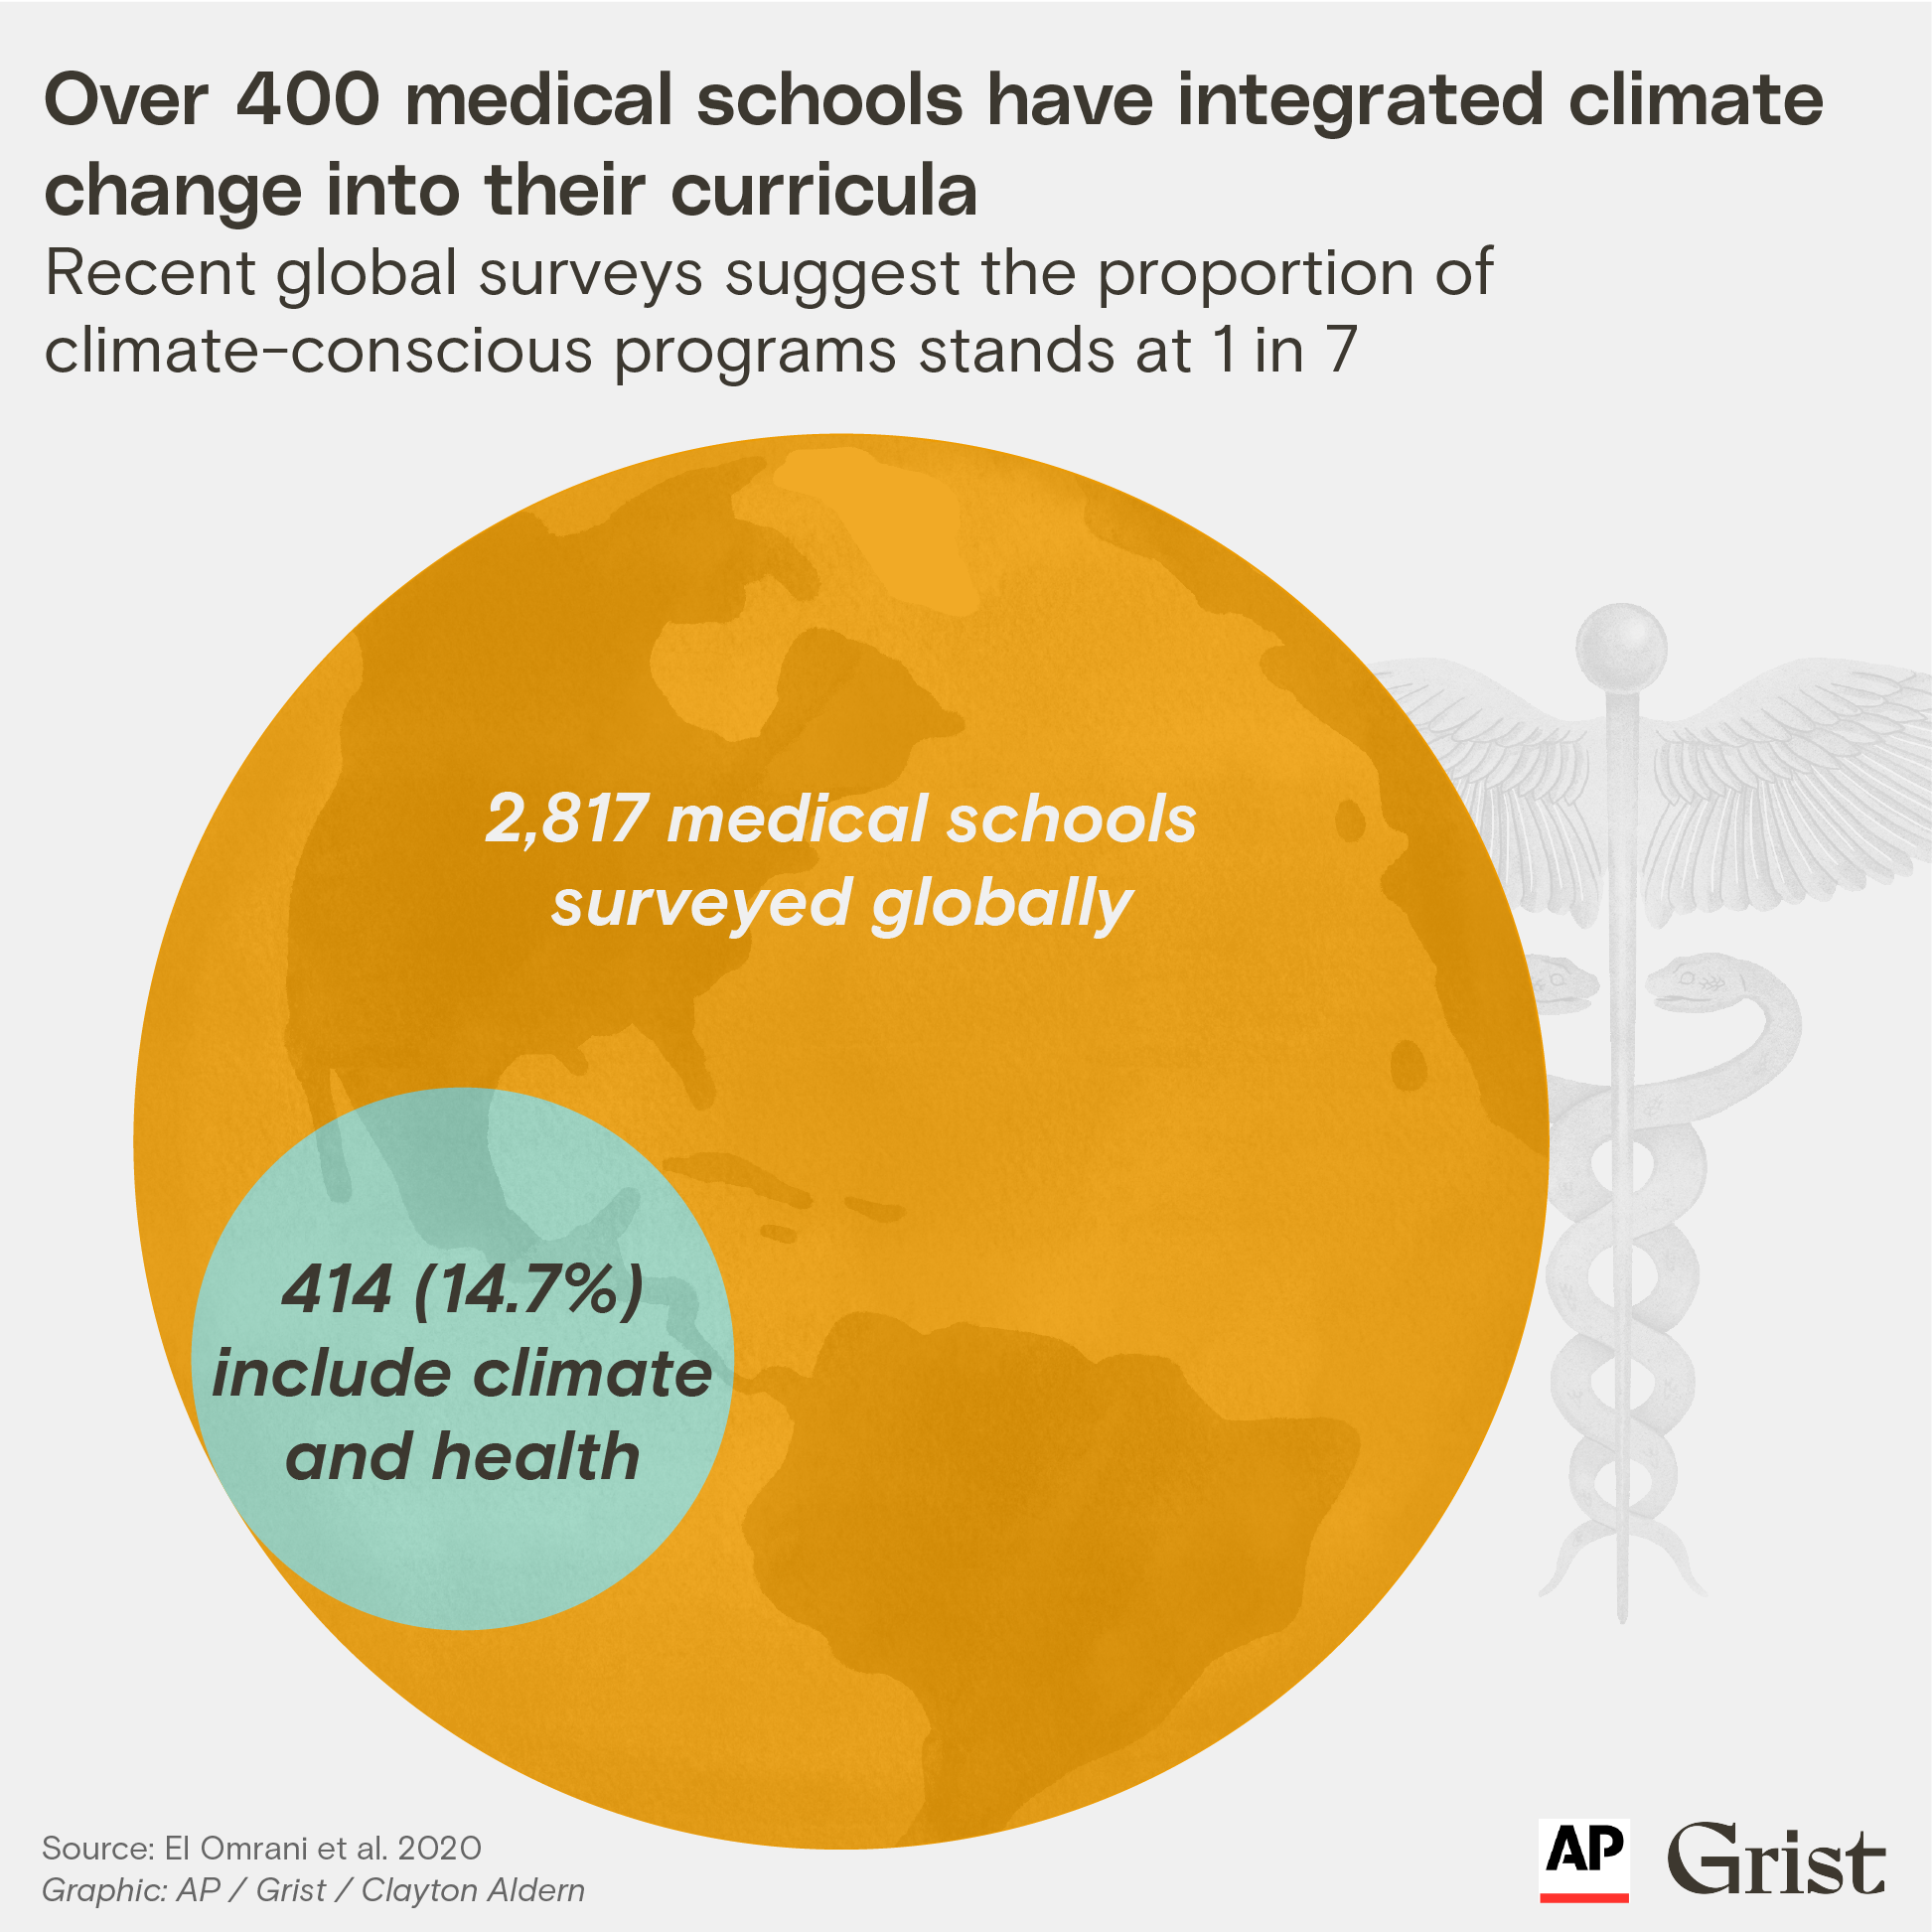 Graphic showing that over 400 medical schools globally have integrated climate change into their curriculum